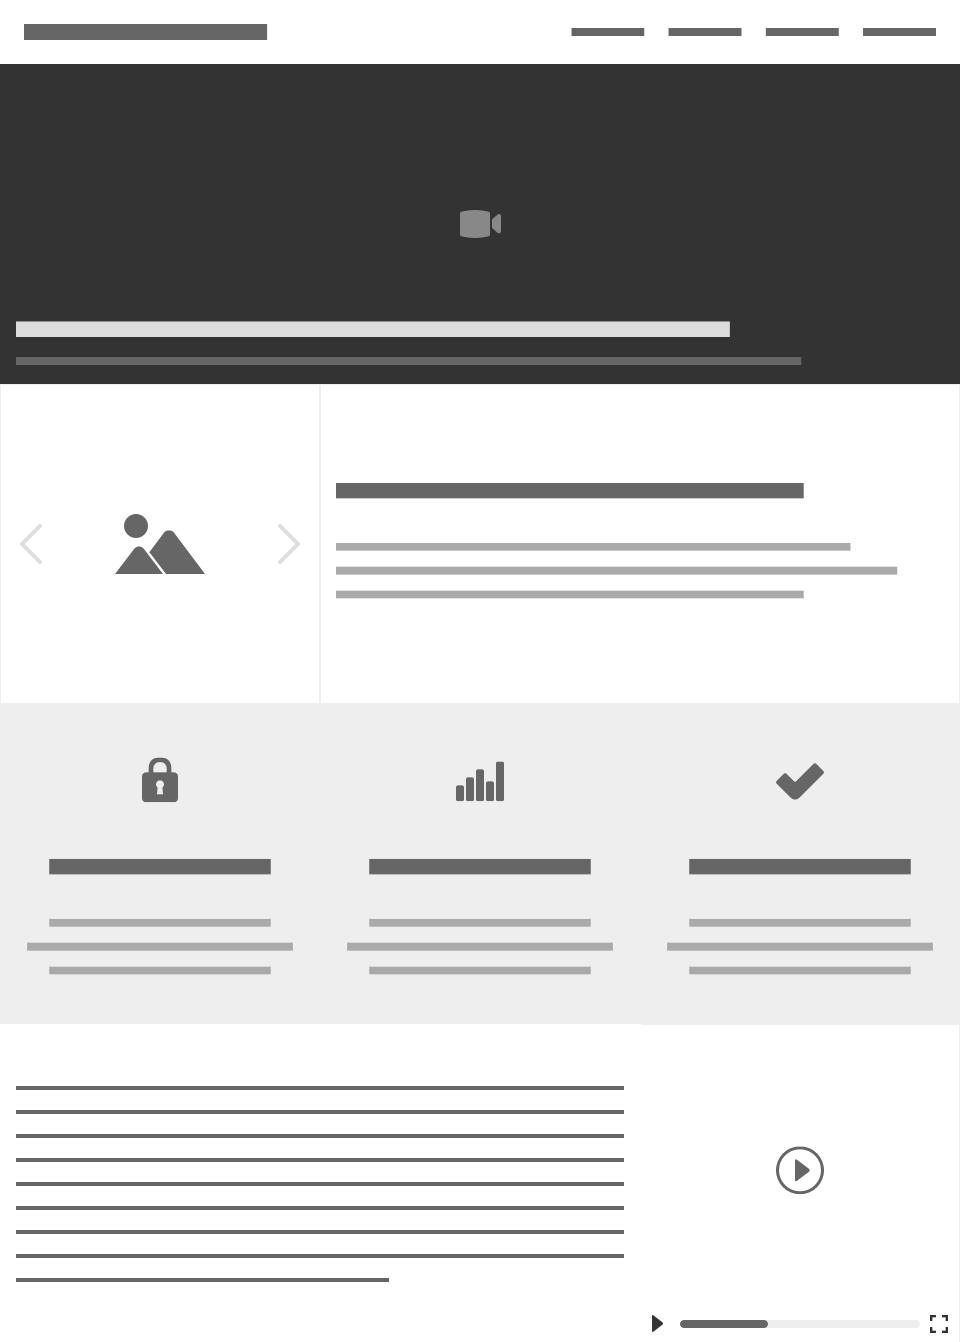 A wireframe of a landing page. At the top is a navigation bar with a left-aligned title, and right-aligned links followed by a hero block a video icon and heading at the bottom. Below is a carousel with a summary to the right of it, then three centered feature blocks with different icons (a lock, a chart, and a check mark), followed by a longer paragraph with a small video block to the right of it.